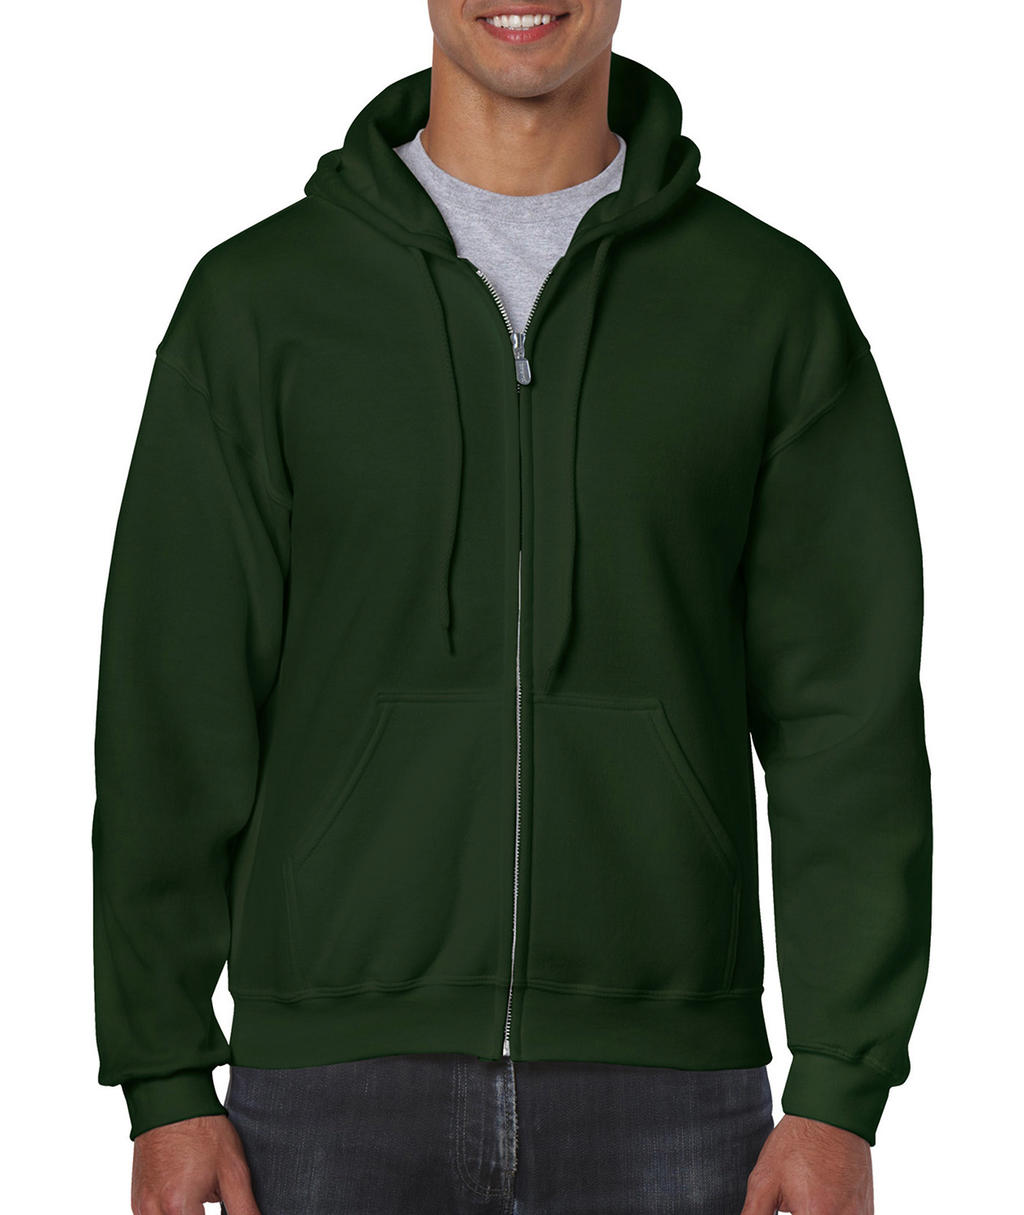  Heavy Blend Adult Full Zip Hooded Sweat in Farbe Forest Green